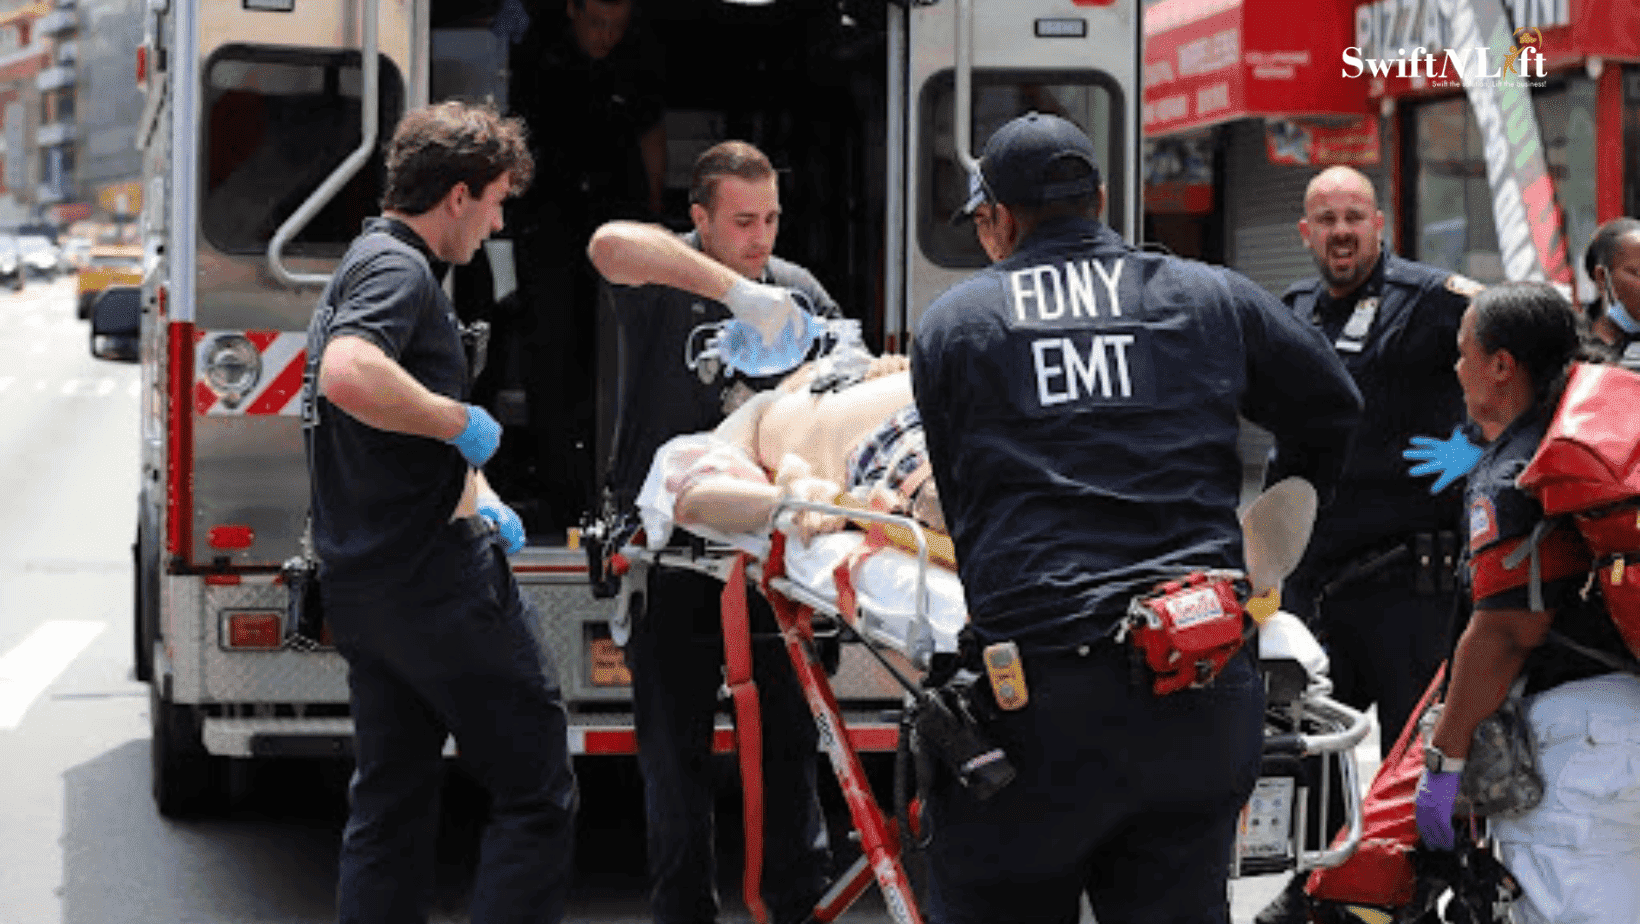 Teen Suspect Identified in Deadly NYC Subway Shooting: Tragic Incident Leaves 1 Dead, 5 Injured